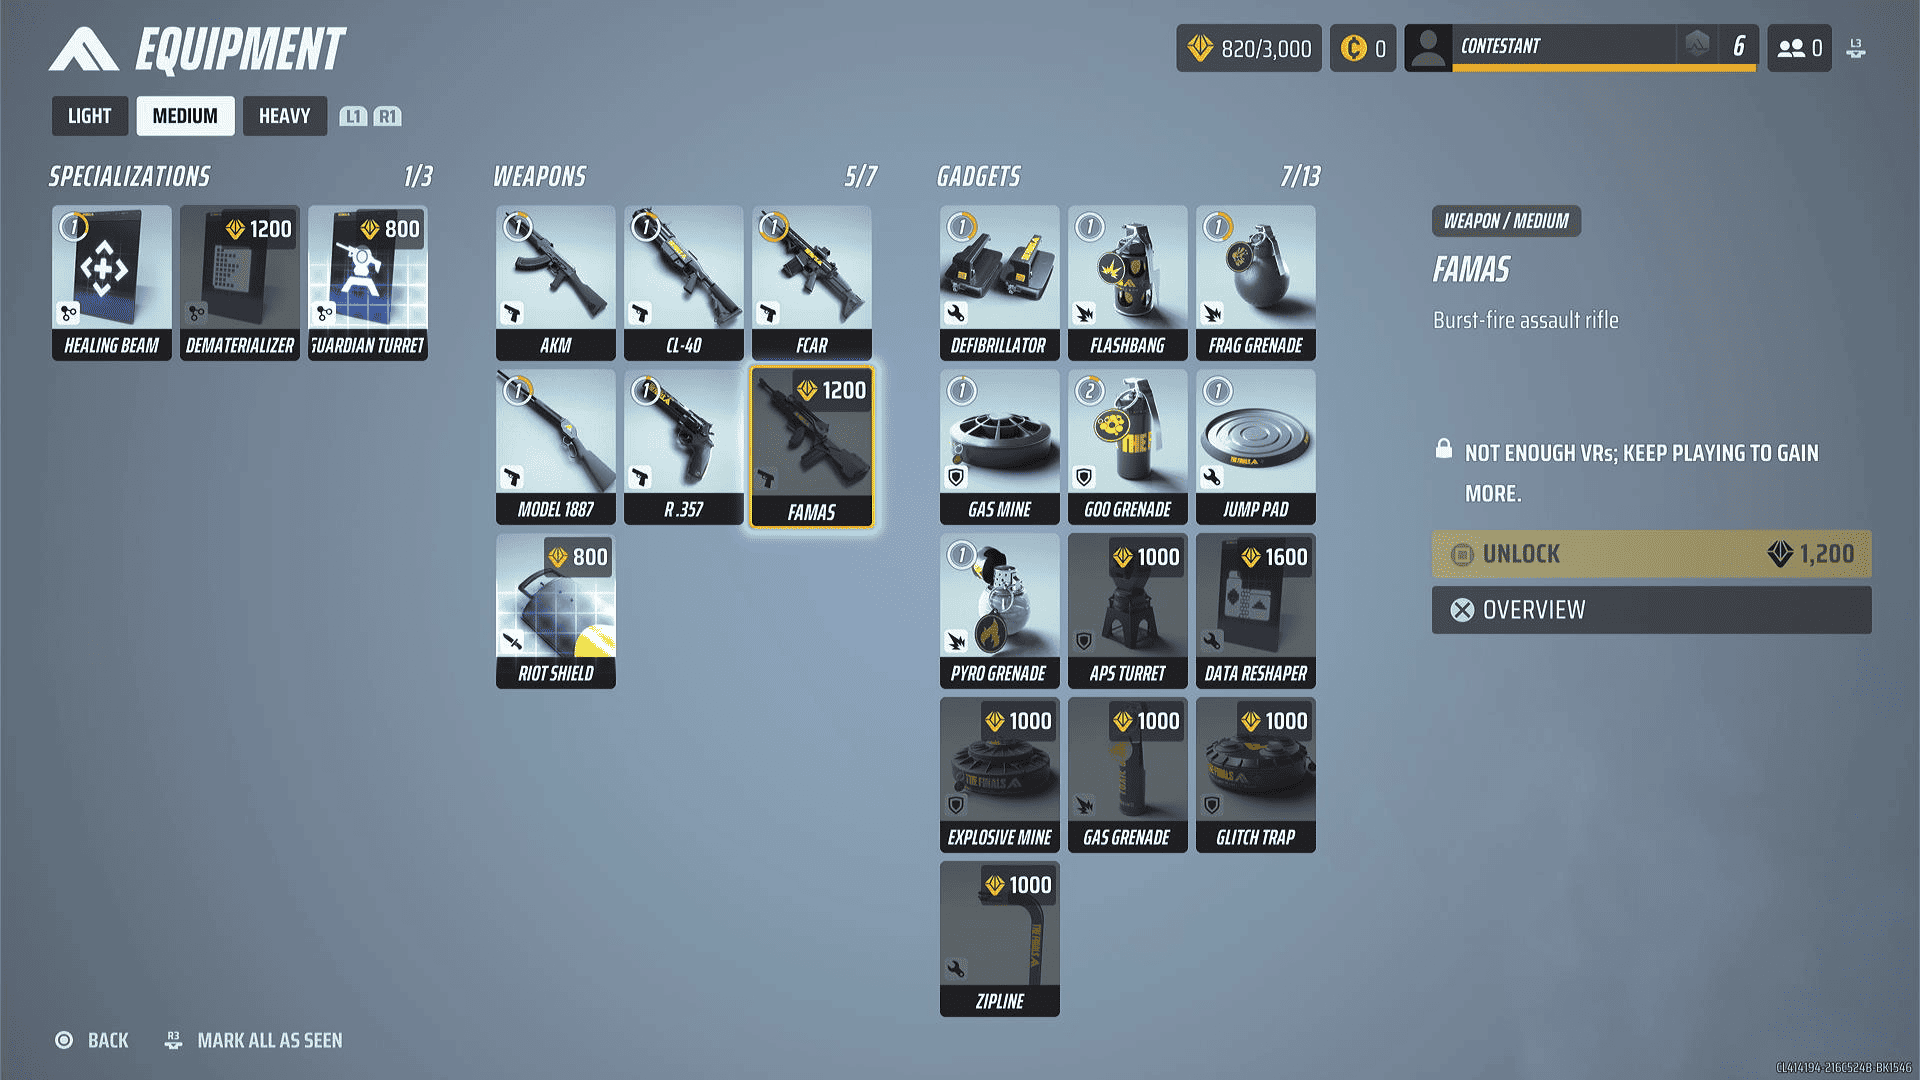 An in-game screenshot showing a player's equipment selection menu in the finals best medium loadout of a first-person shooter game, with various weapons, gadgets, and specializations available for customization or unlock.